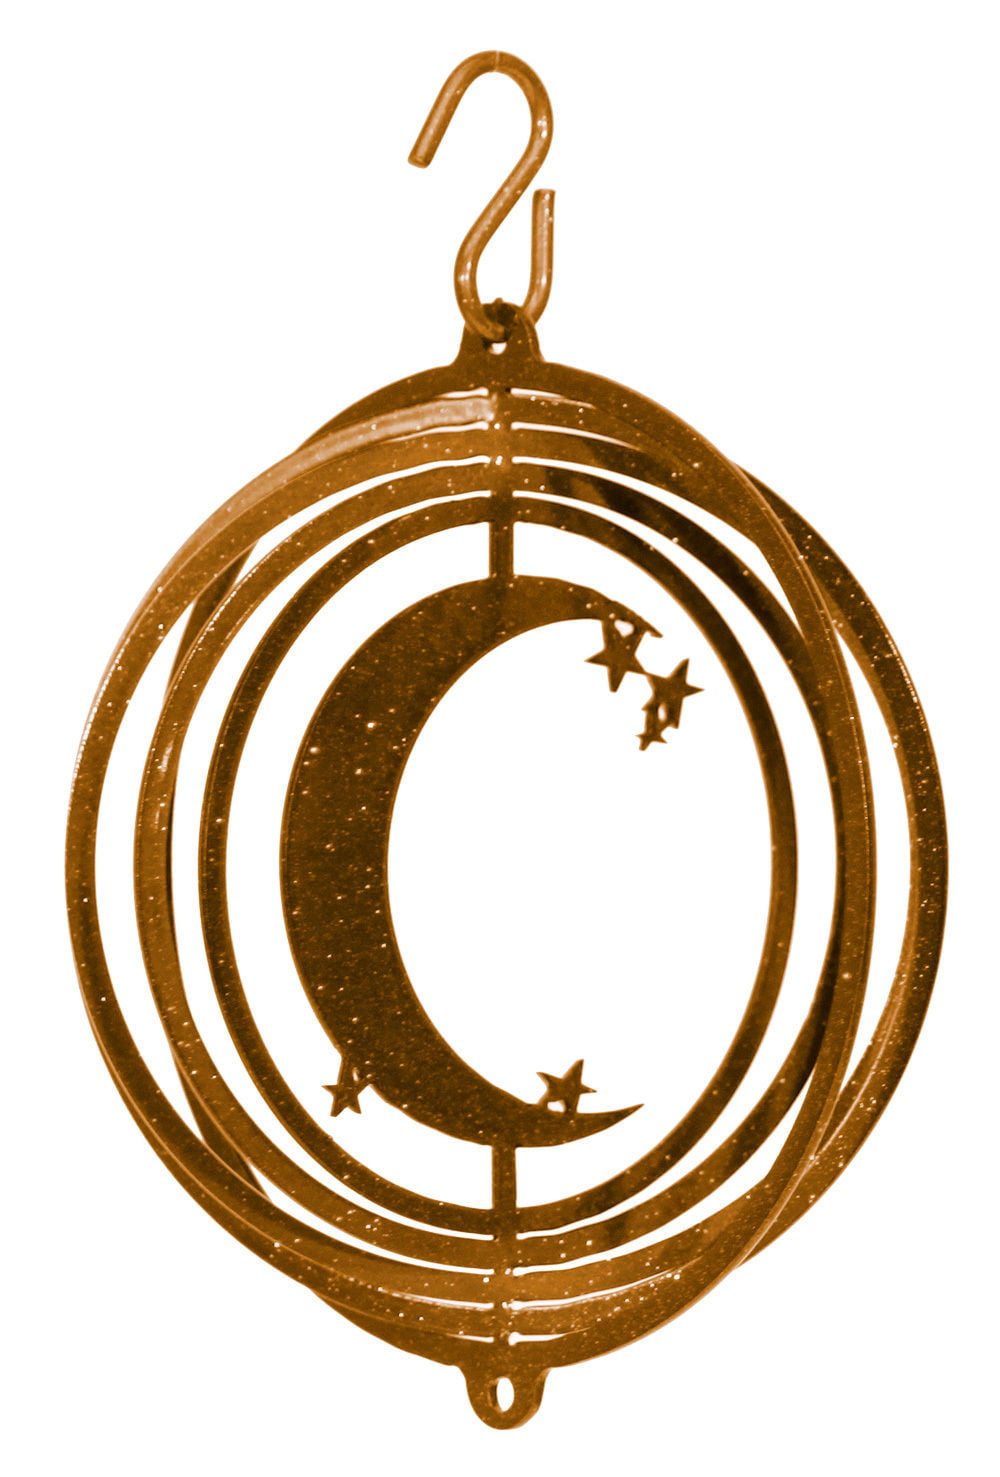 SWEN Products MOON AND STAR Tini Swirly Christmas Tree Ornament 